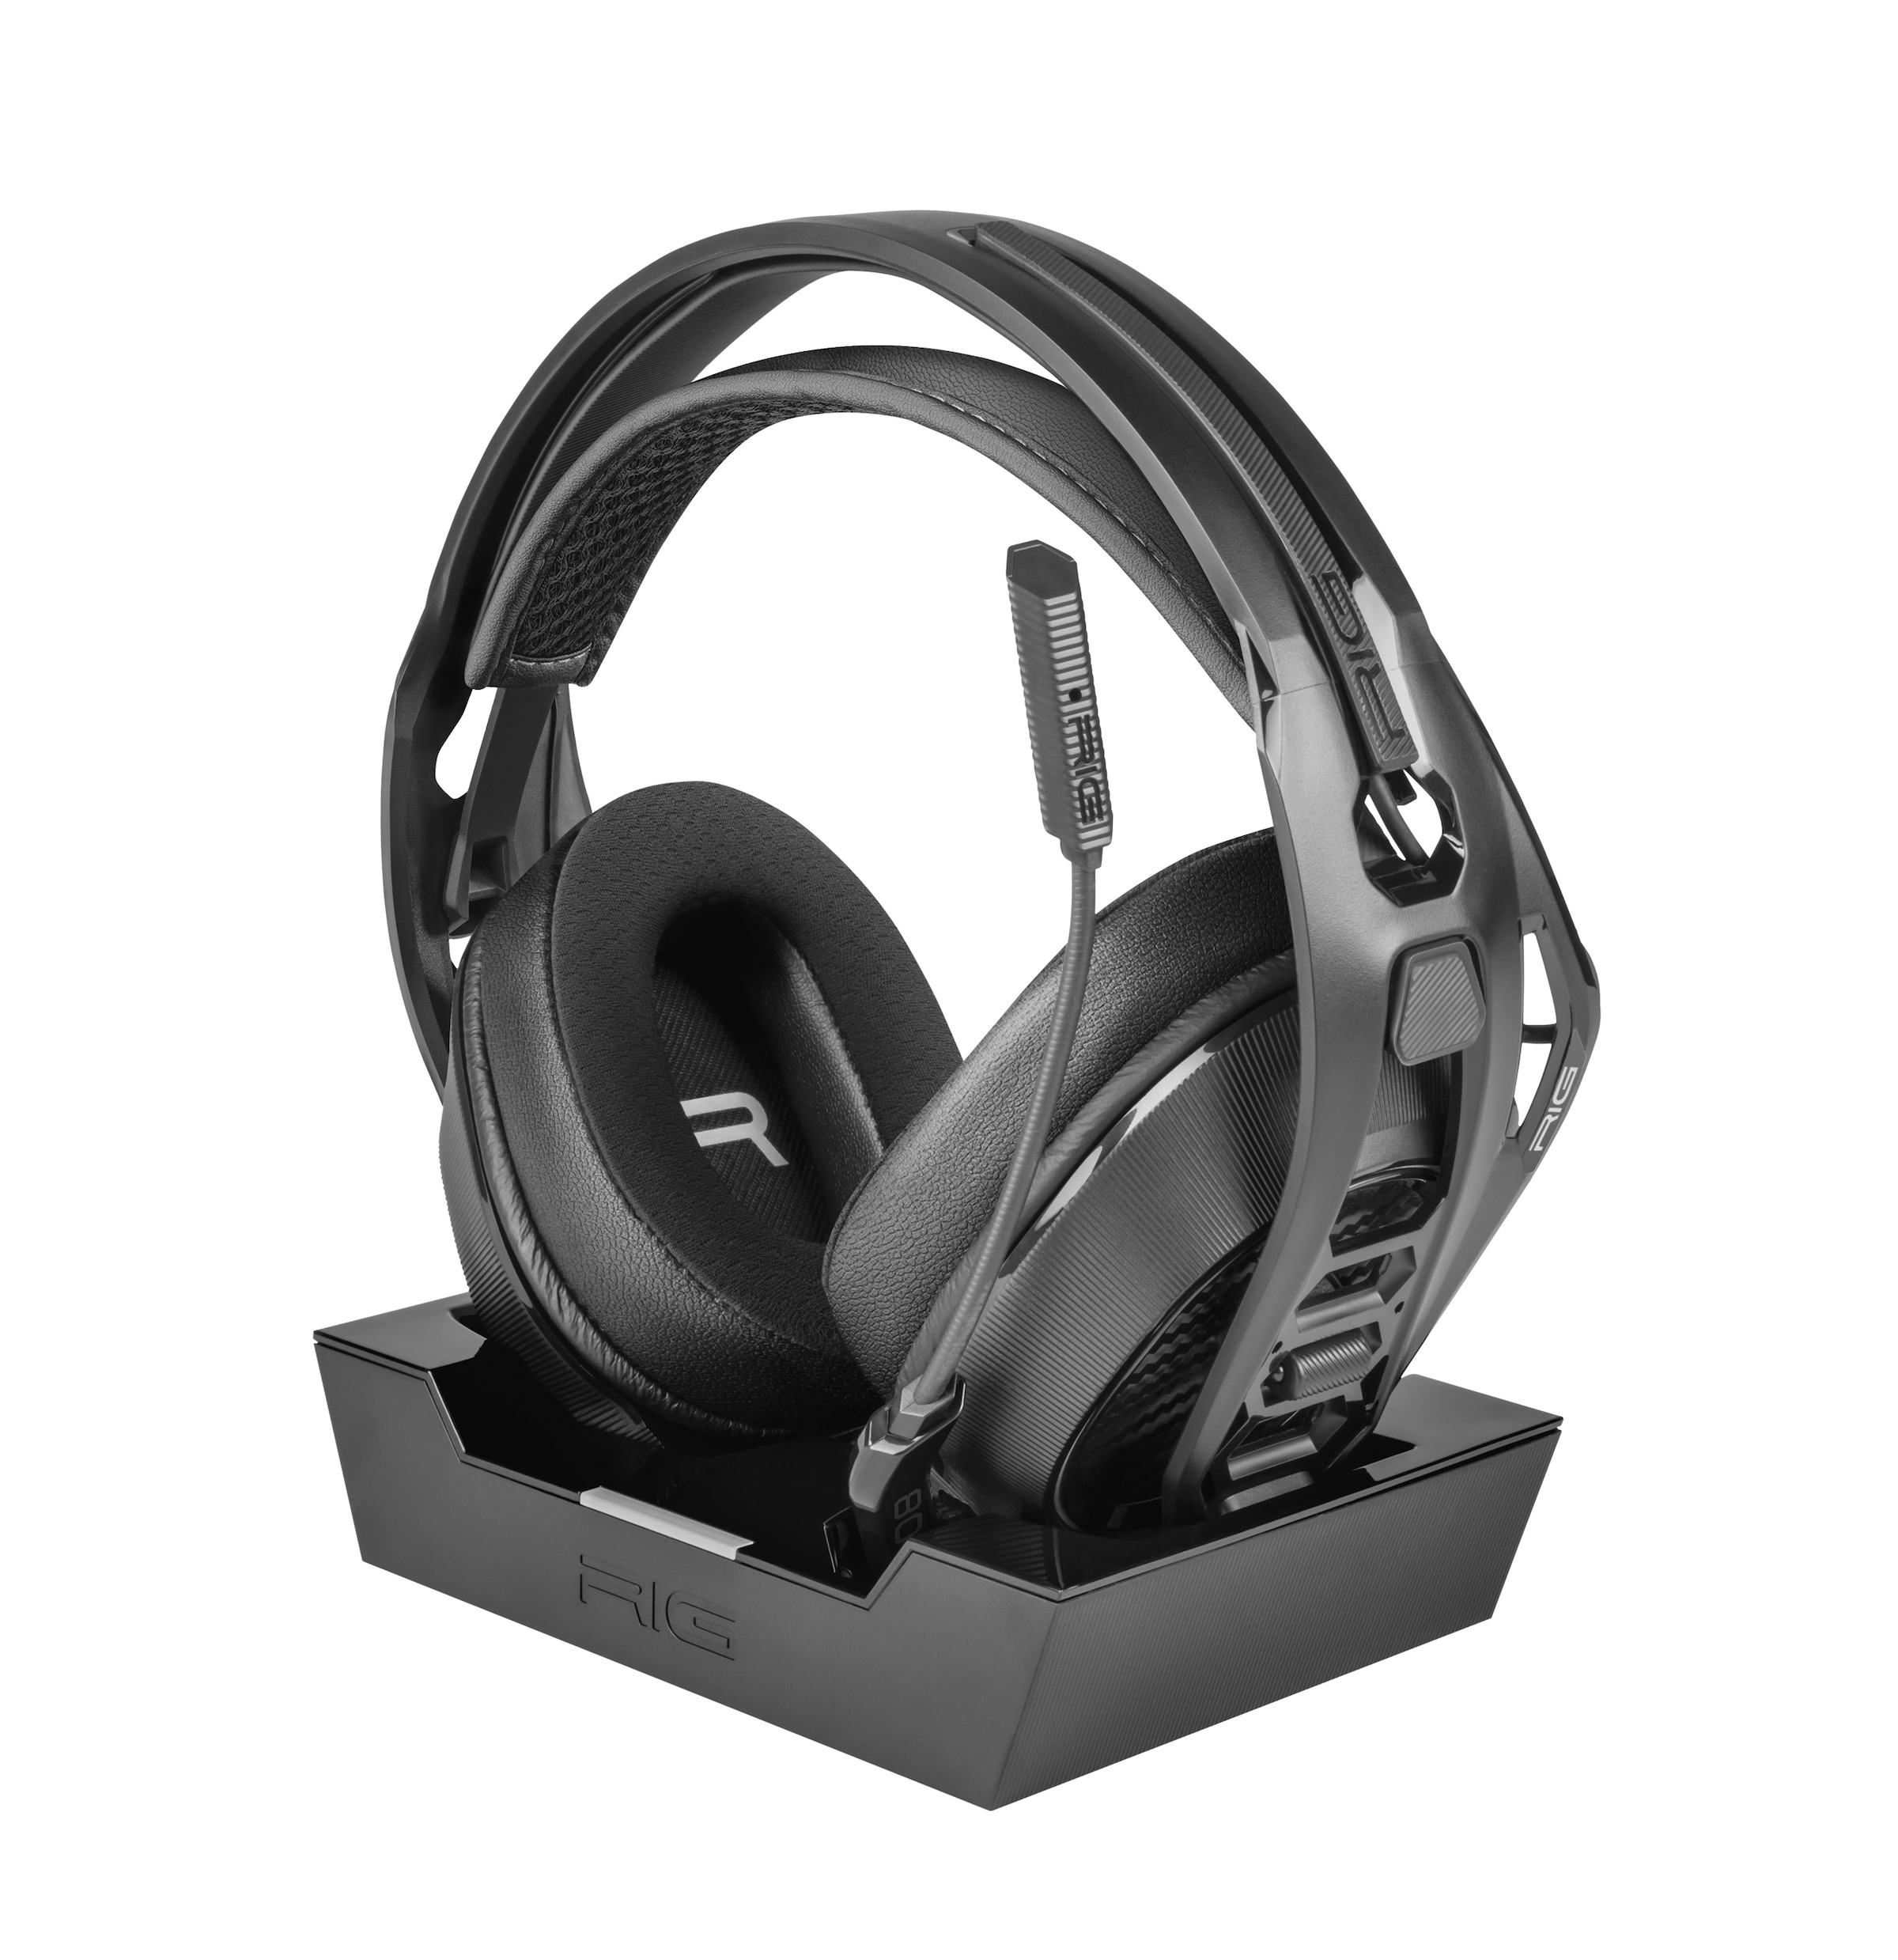 Gaming-Headset »RIG 800 PRO HX, schwarz, USB, kabellos, Dolby Atmos, Over Ear«,...